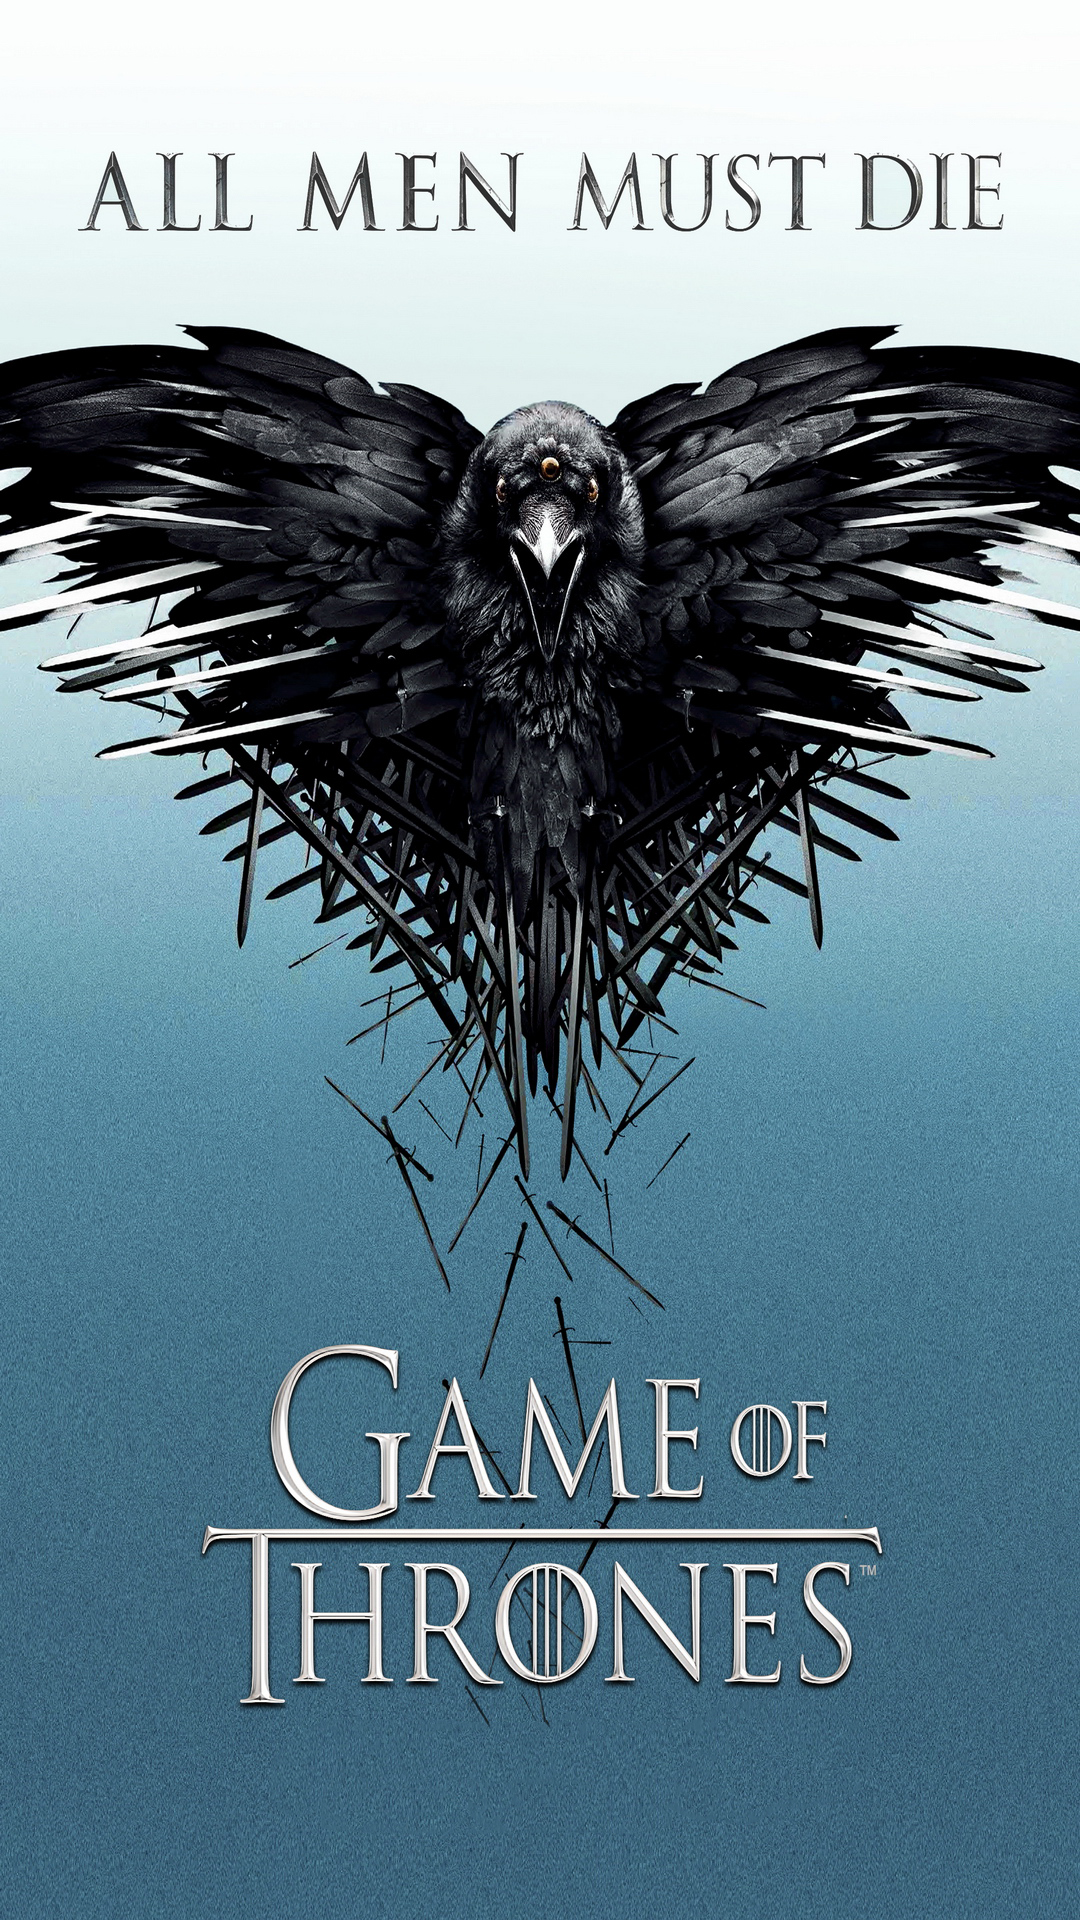 Games Of Thrones Wallpaper Android - HD Wallpaper 